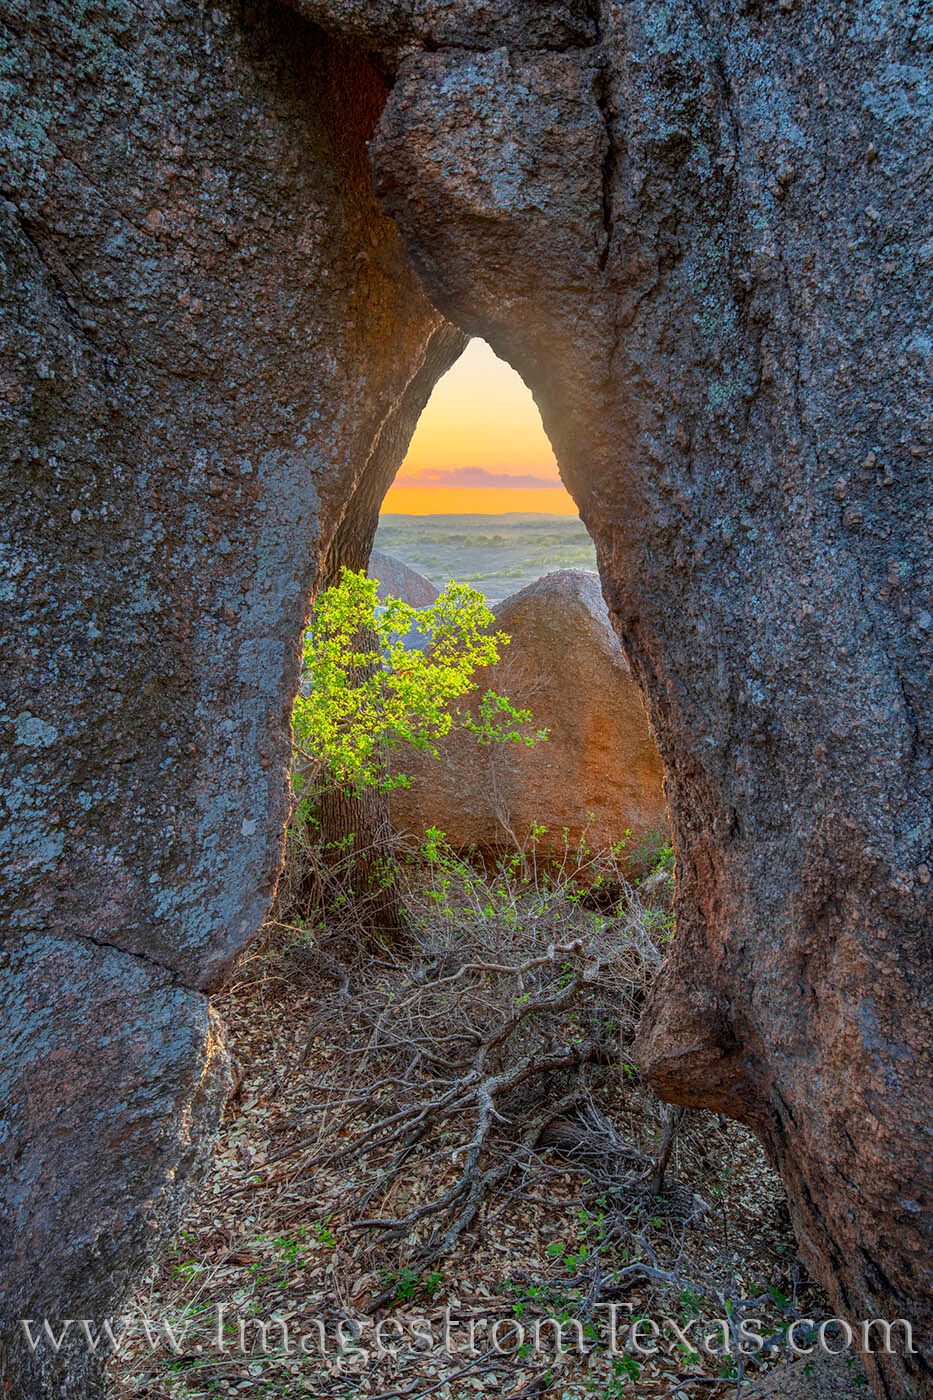 A small arch offers a window to the Hill Country at Enchanted Rock State Natural Area.